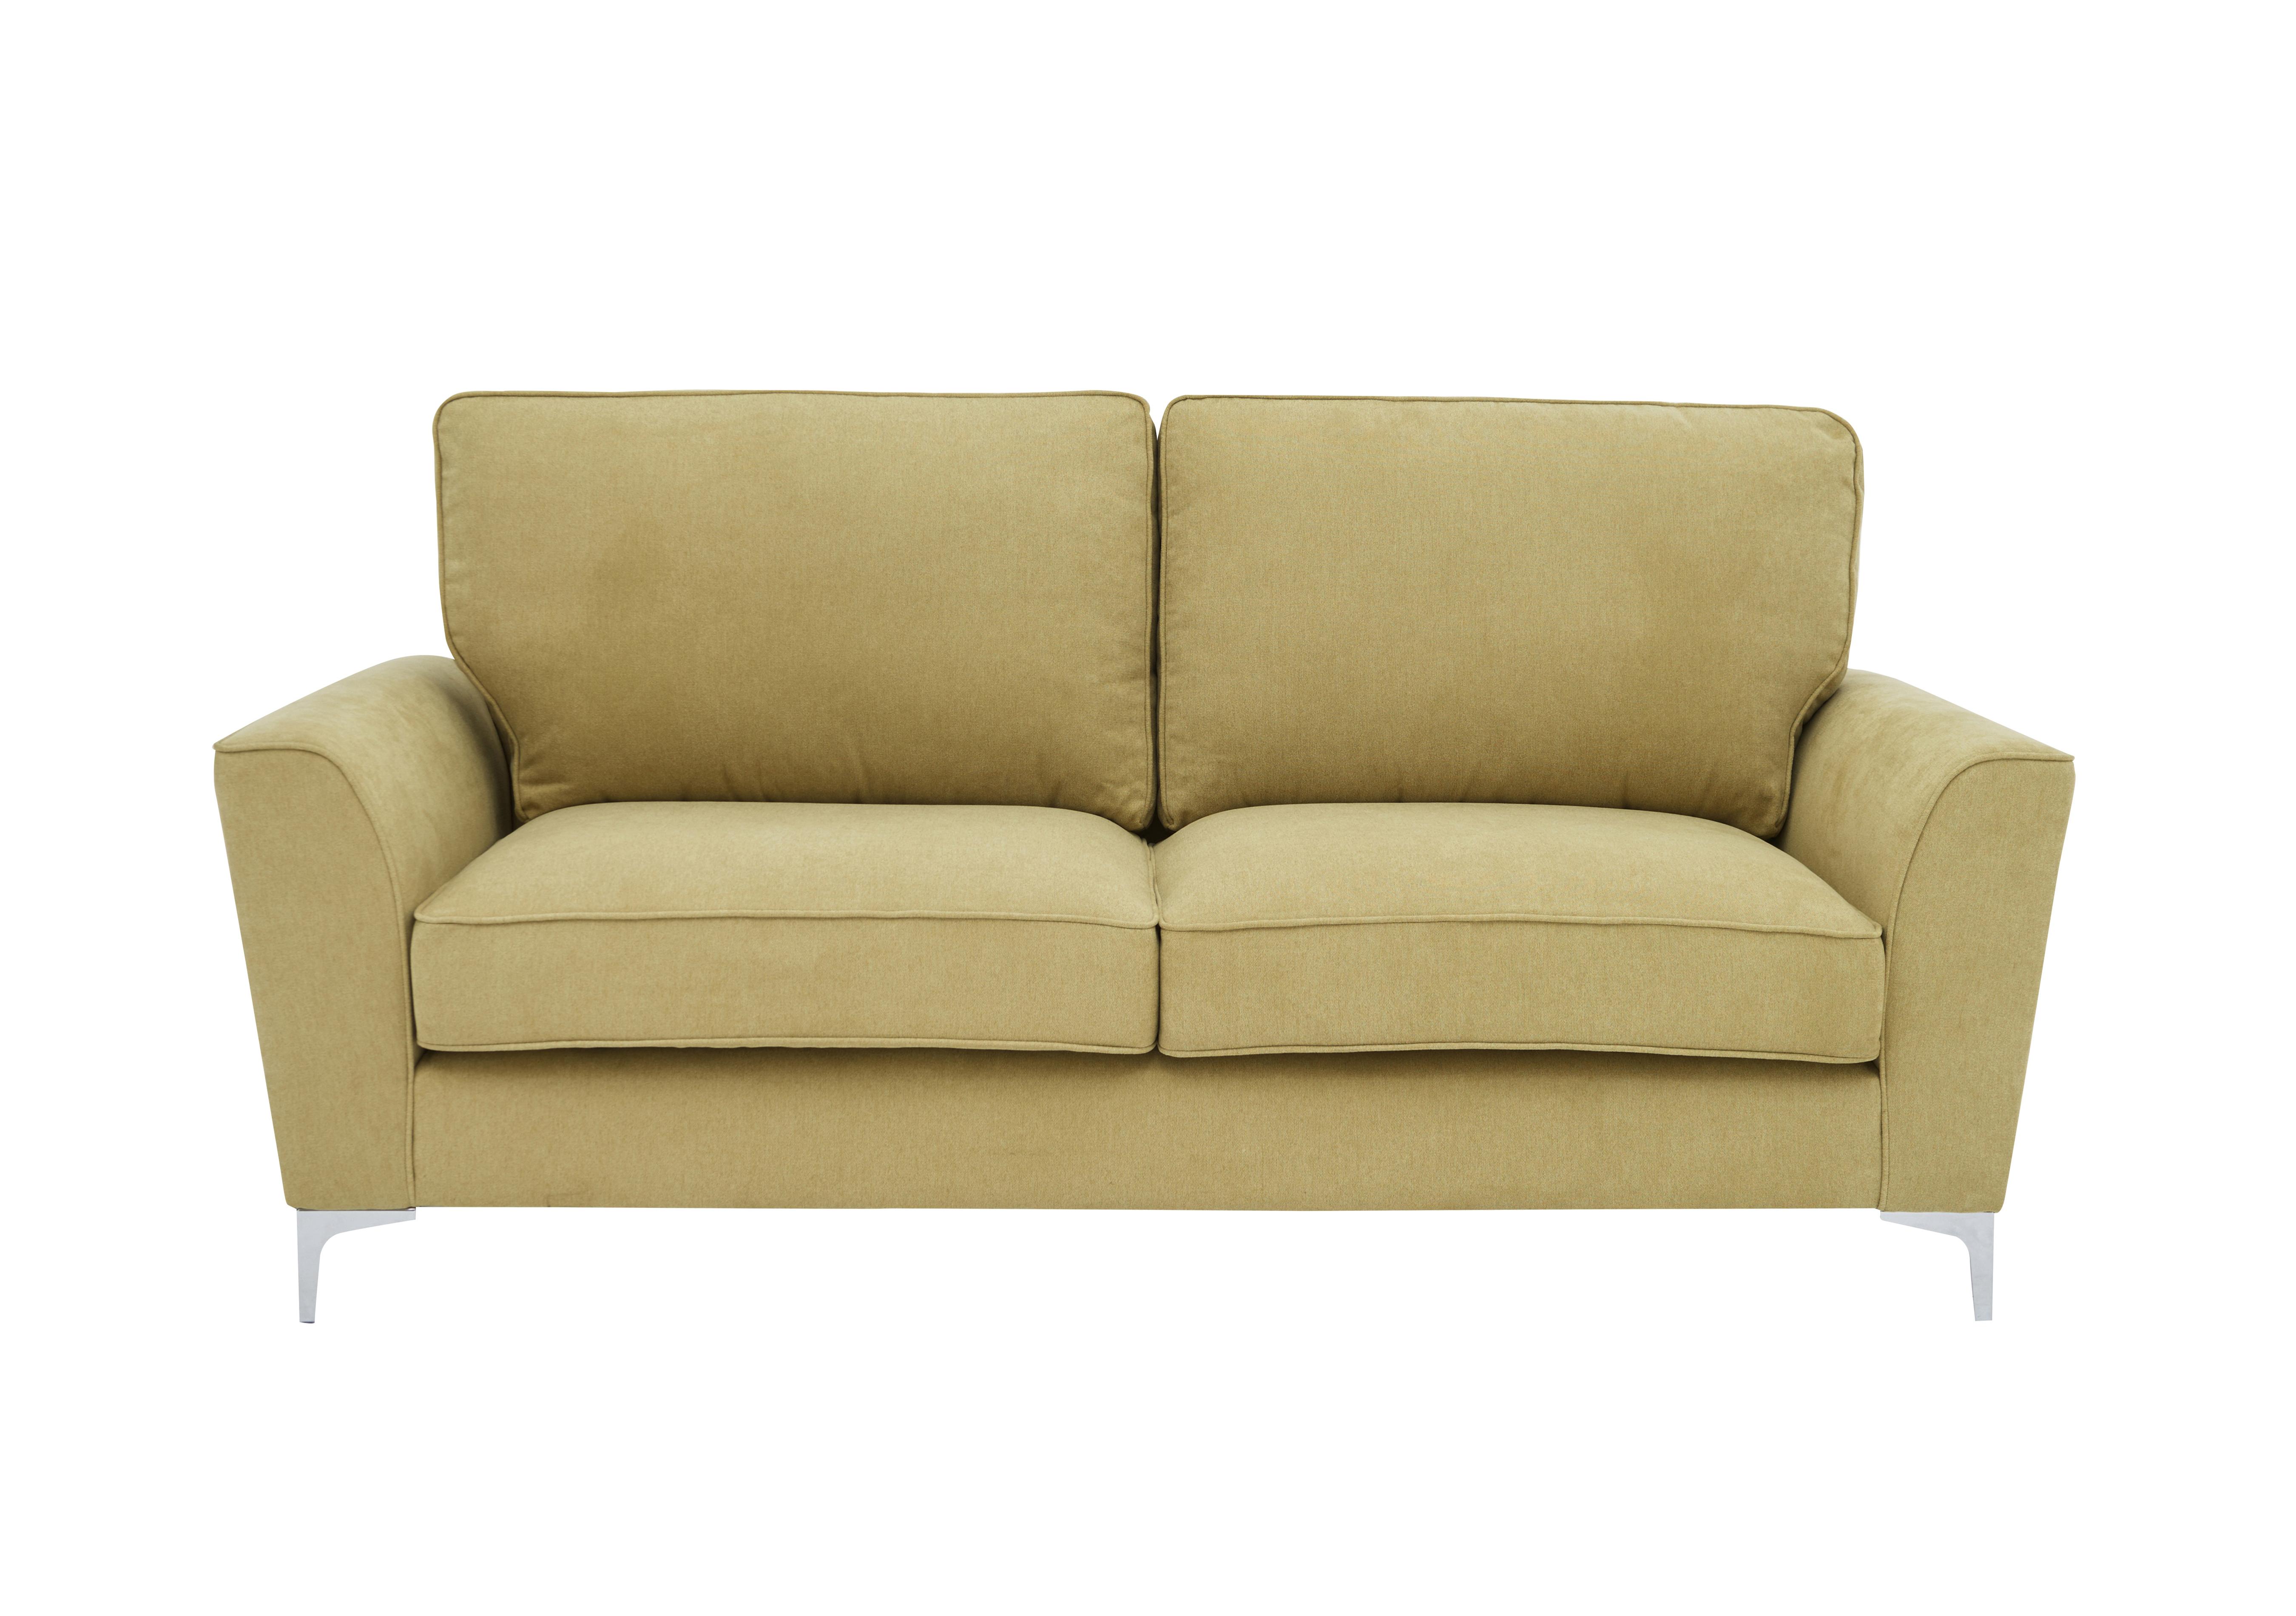 Legend 3 Seater Classic Back Fabric Sofa in Cosmo Apple on Furniture Village